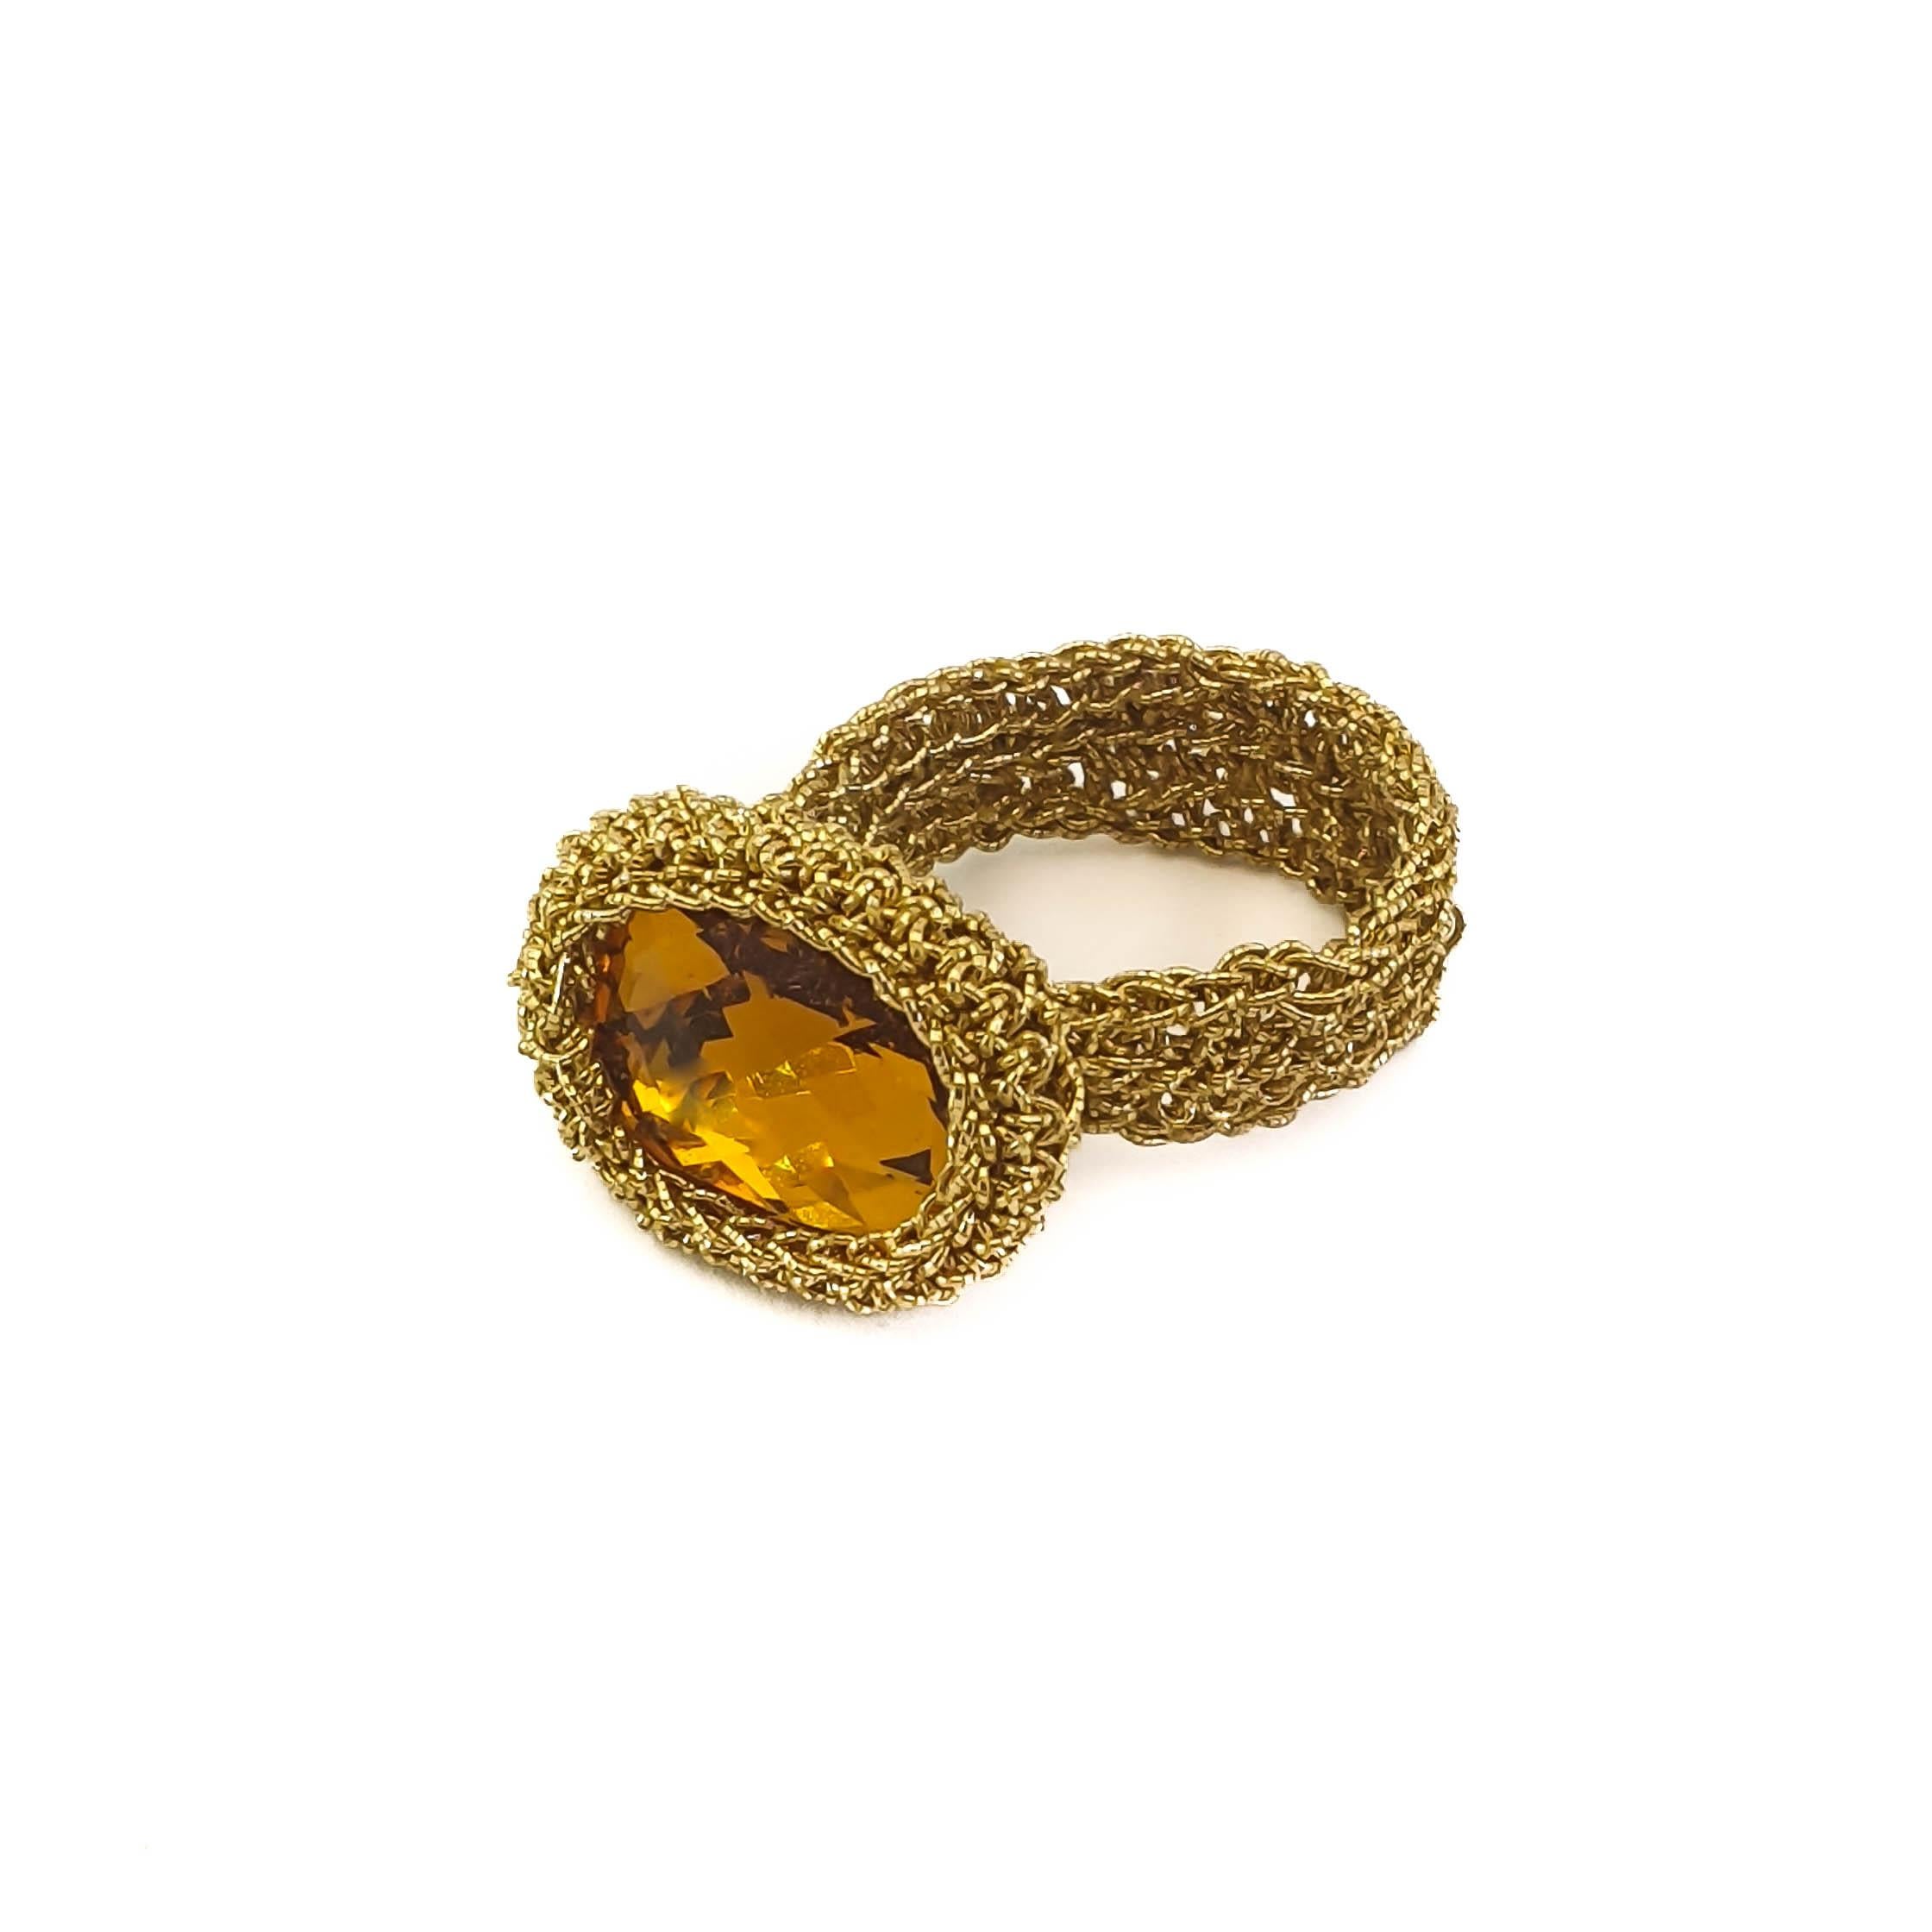 Delicately crafted hand crochet gold thread ring with a lovely vintage amber Swarovski Crystal. This ring is a US size 6. It can be stretched a little to fit a larger size. This ring can be custom made with different Swarovski Crystals.

Shenhav's